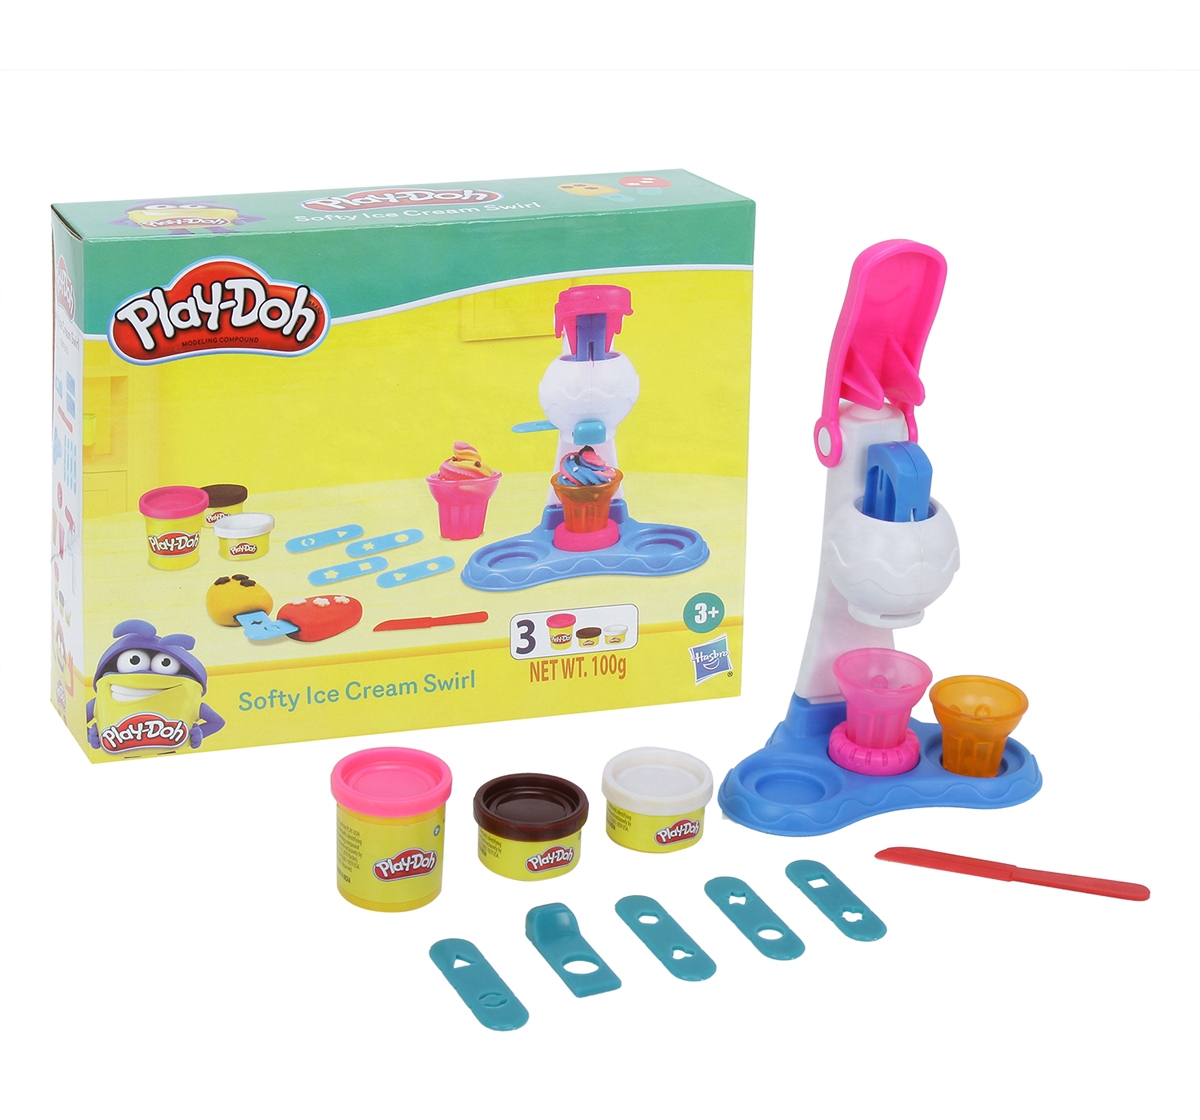 Play-Doh | Play Doh Softy Ice Cream Swirl Playset for Kids 3Y+, Multicolour 0